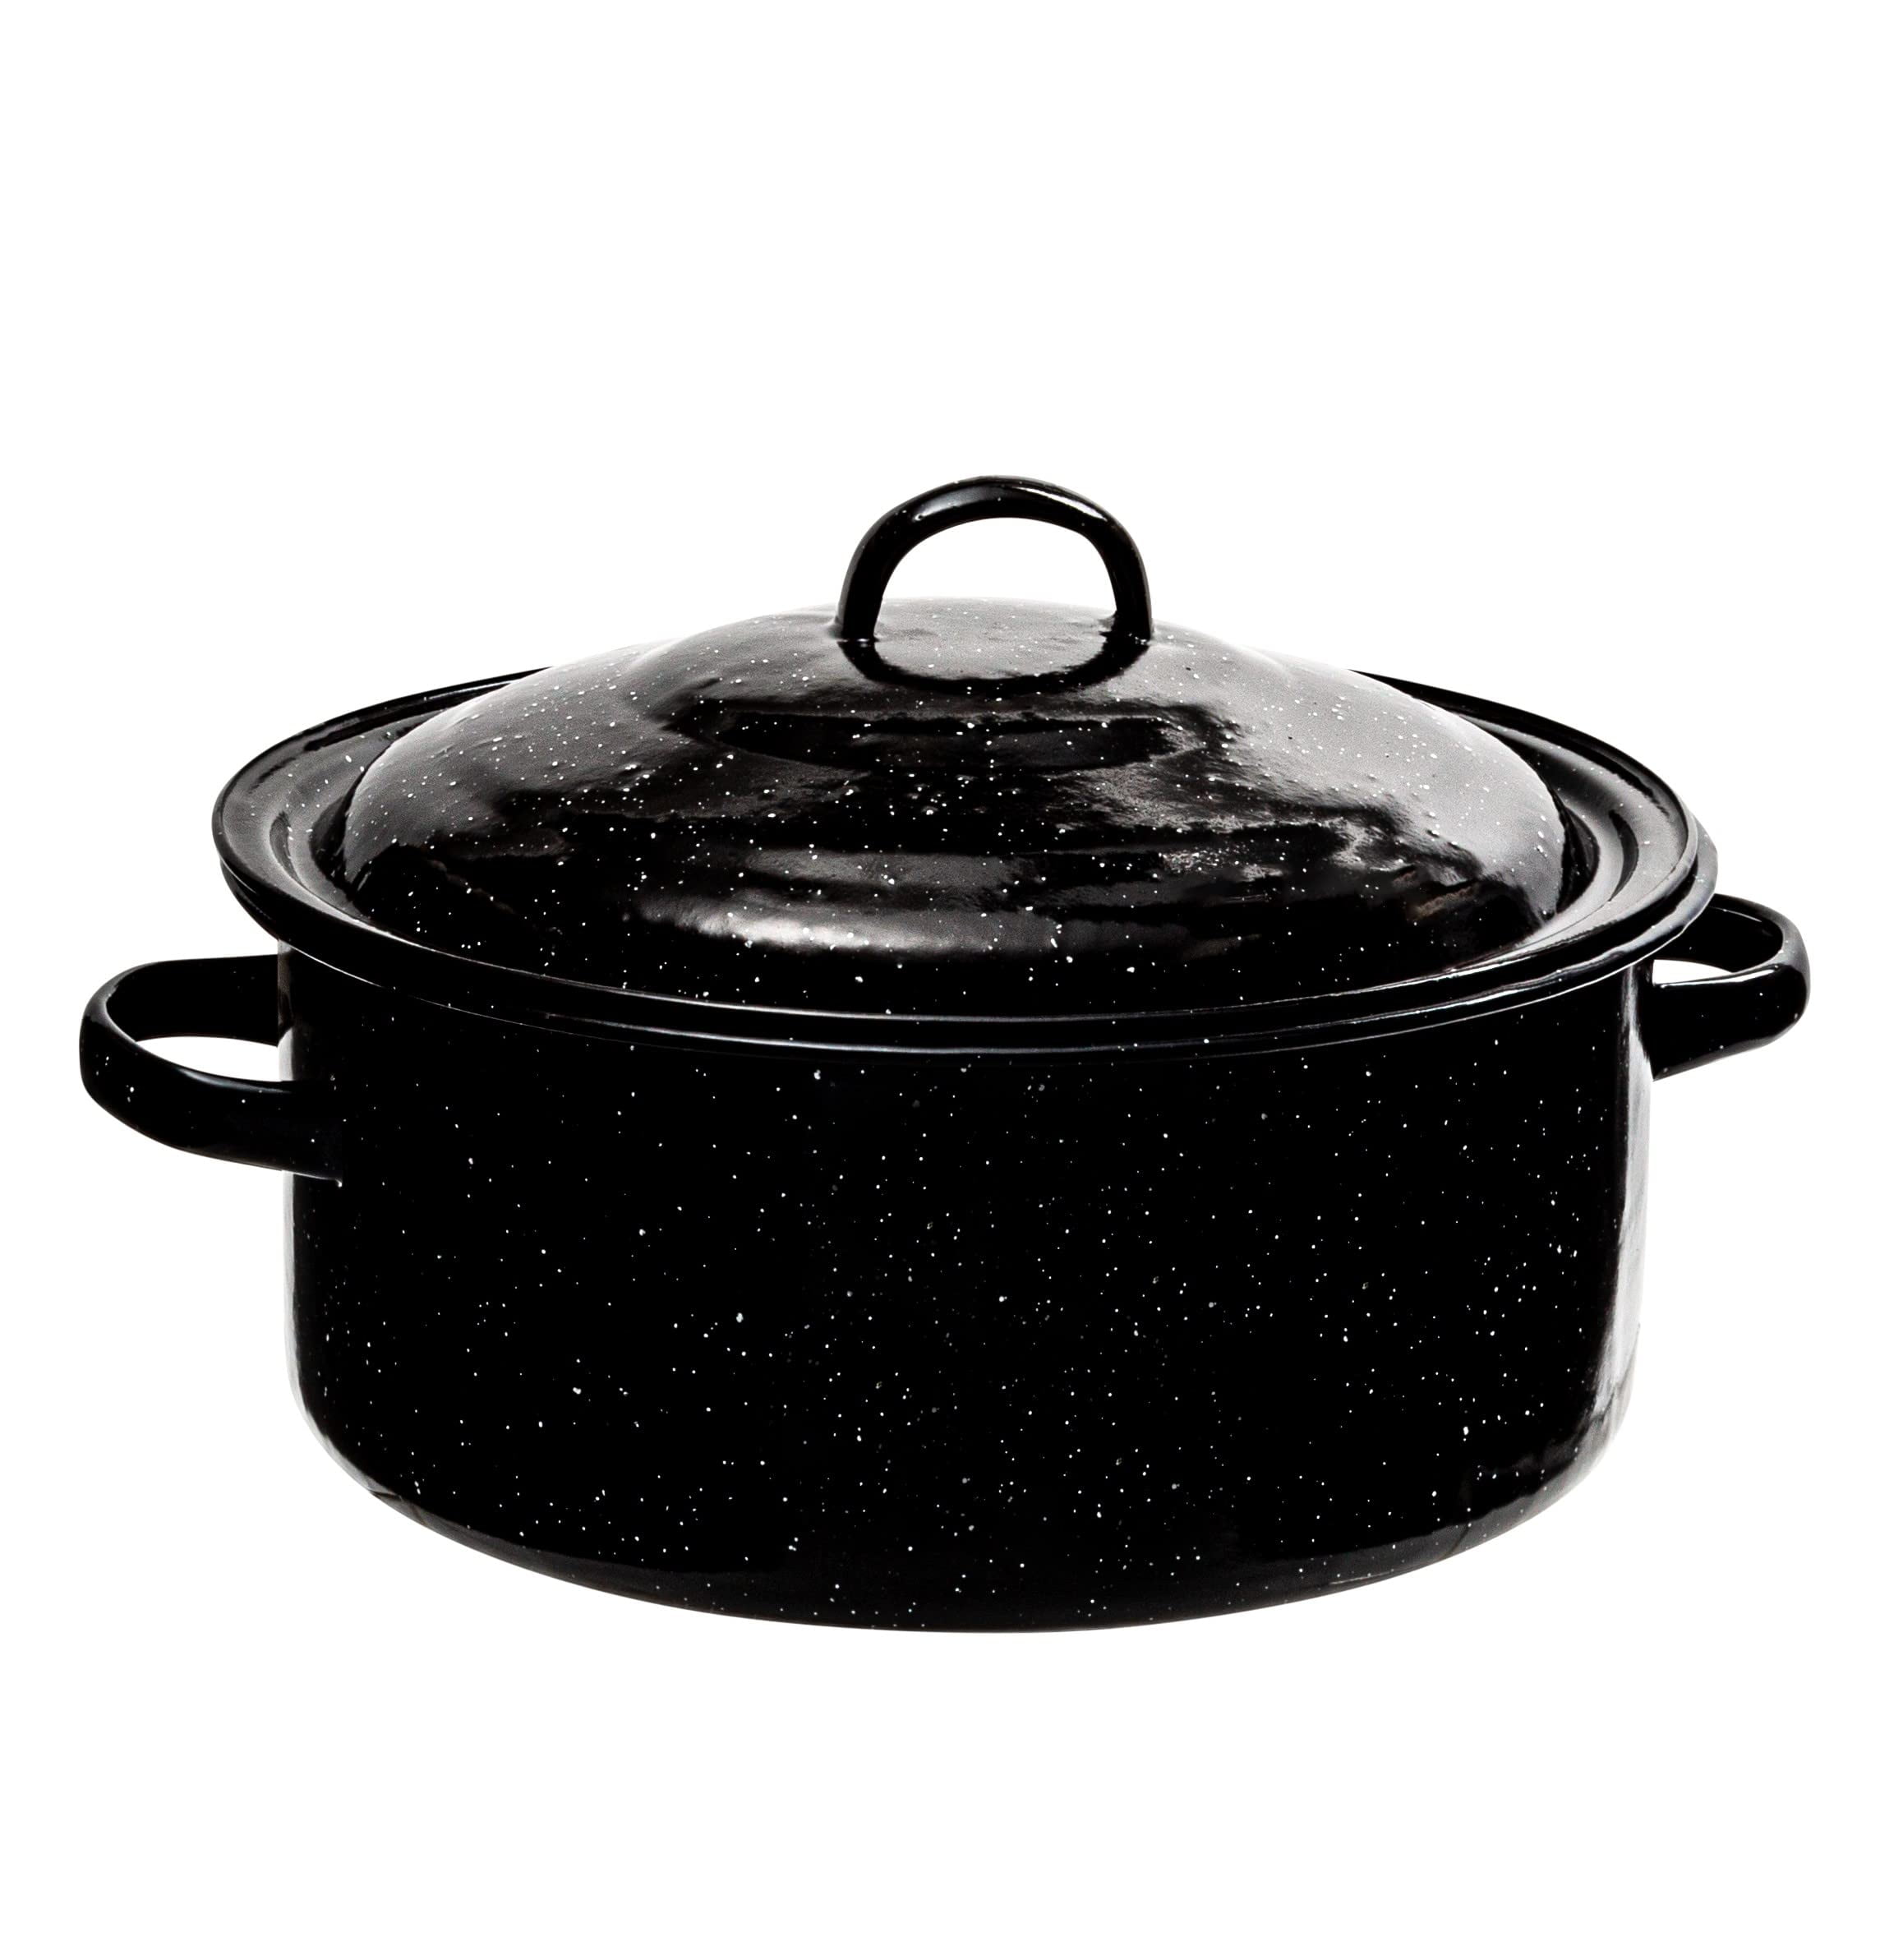 Millvado Granite 1 Quart Saucepan: Naturally Nonstick Sauce Pots - Speckled Enamel Cookware - Small Sauce Pan for Cooking and Boiling - Granite